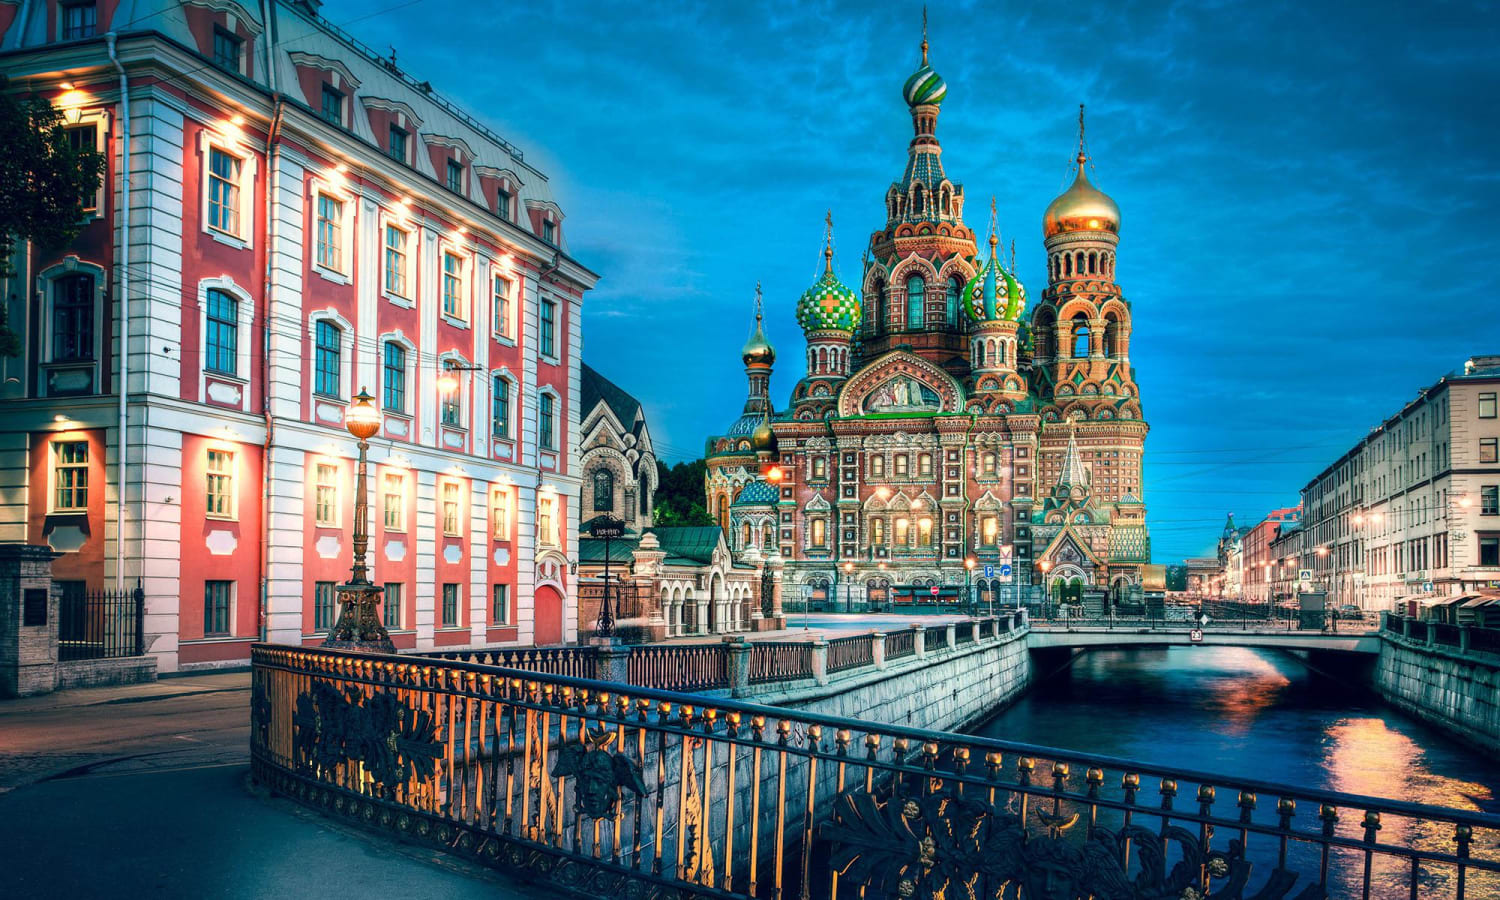 The Church of Savior on the Spilled Blood - St Petersburg